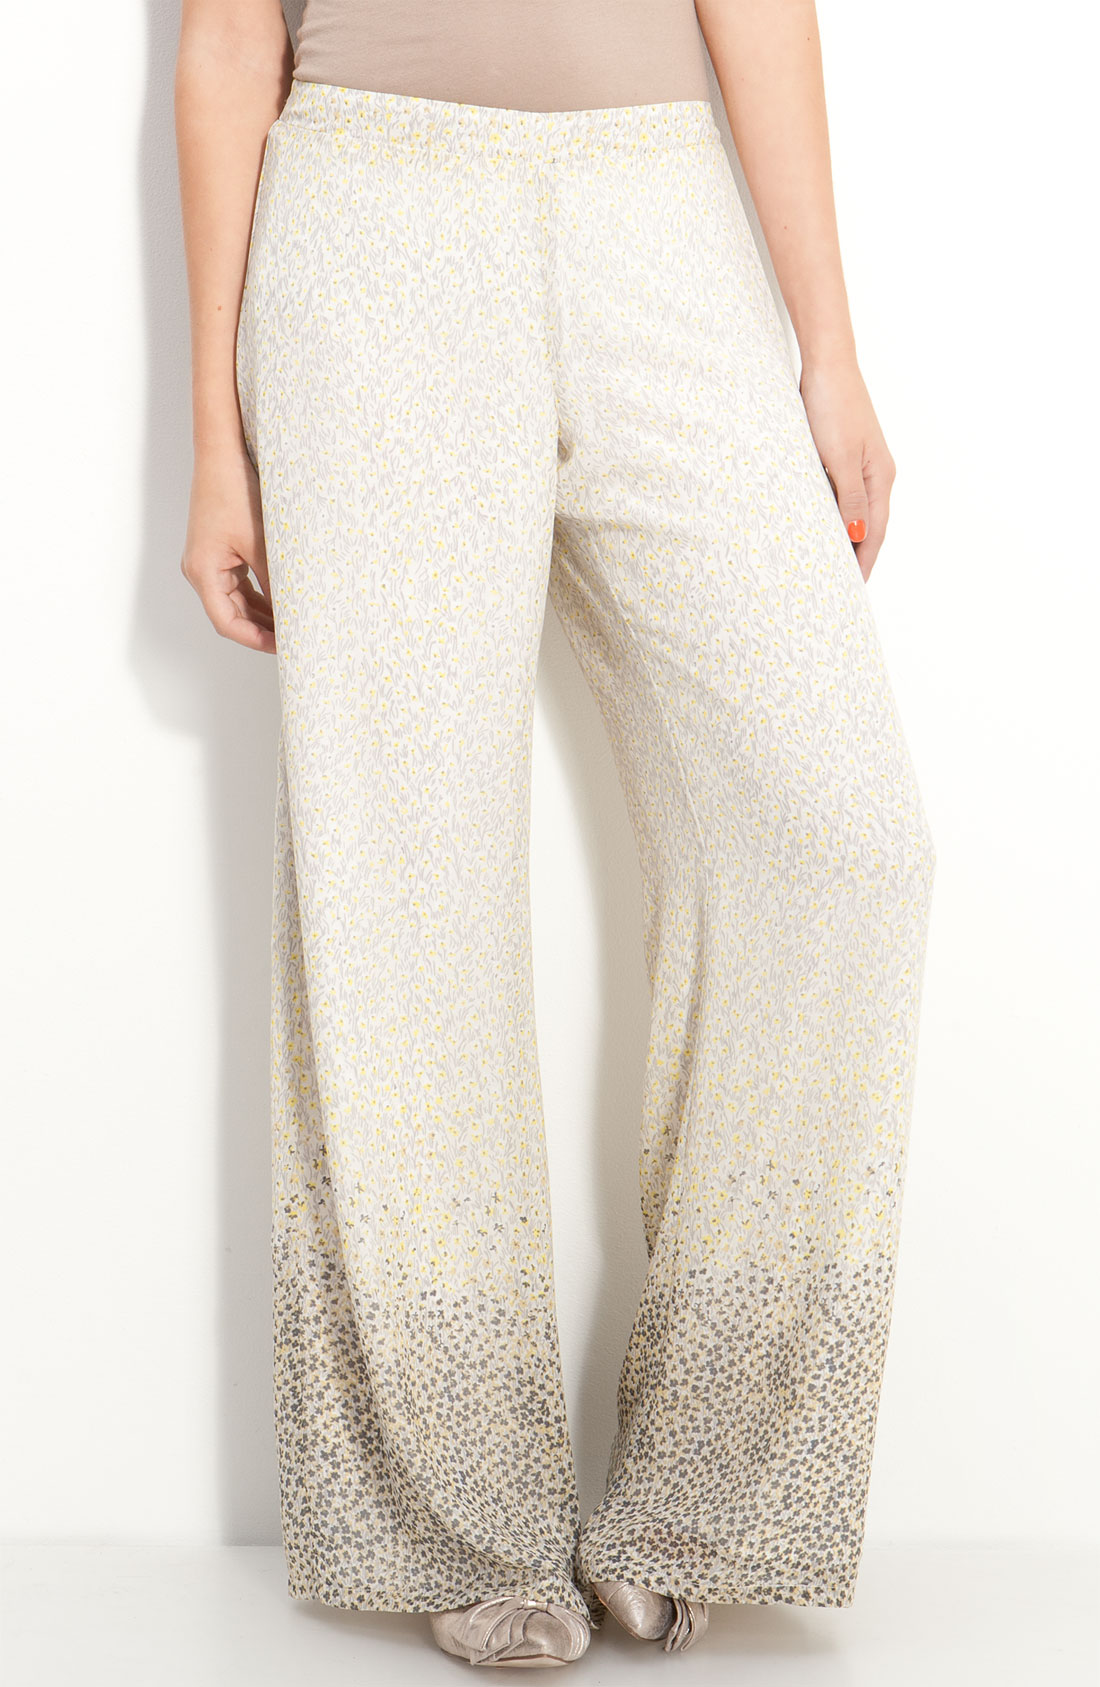 Mimi Chica Printed Chiffon Palazzo Pants in White (ivory) | Lyst